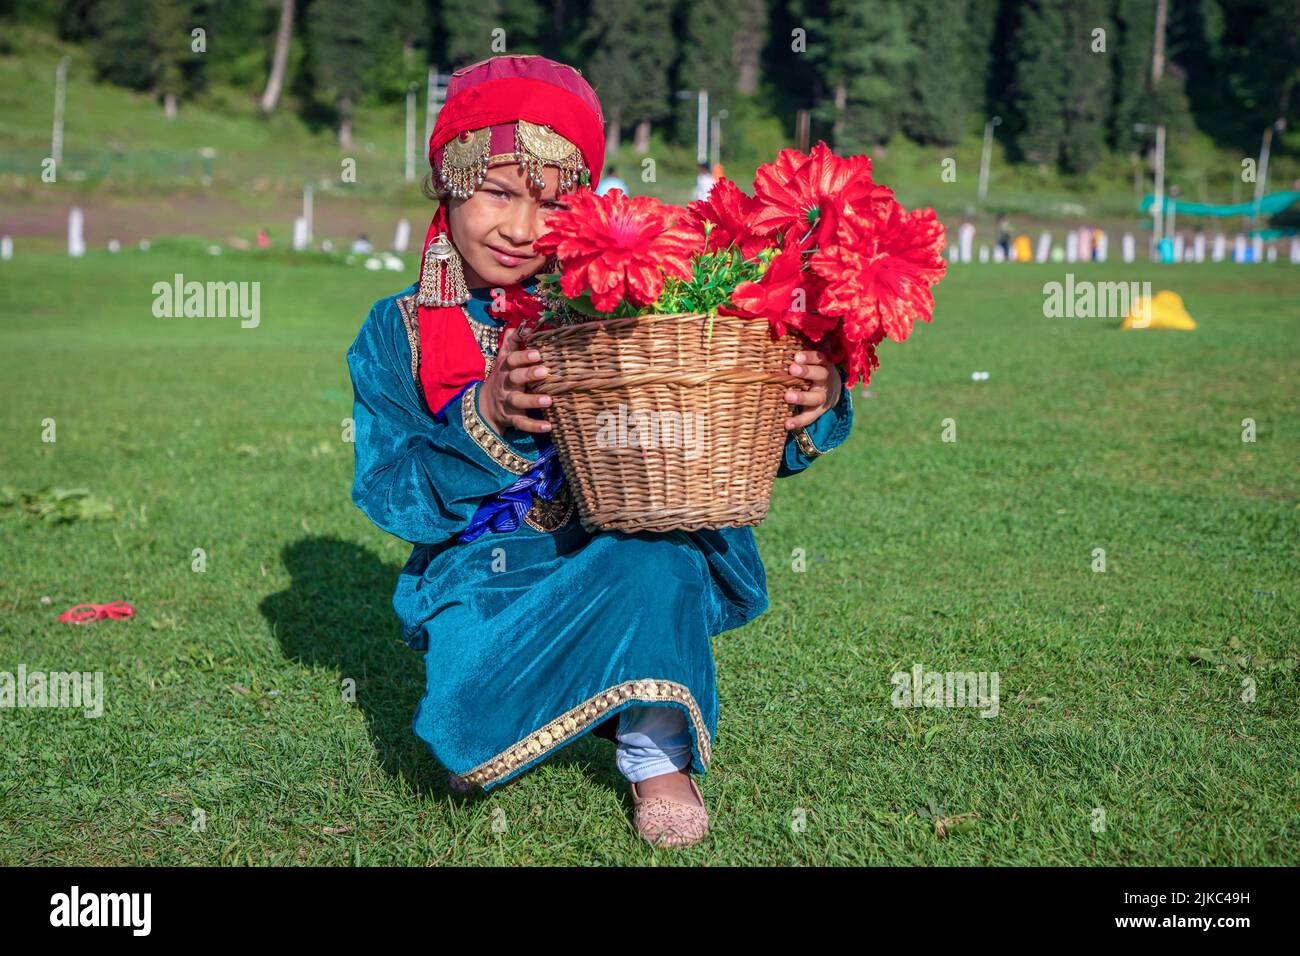 Srinagar, India. 30th July, 2022. A girl dressed in a traditional Kashmiri dress poses for a photo while holding a flower basket on a sunny day at famous tourist resort Gulmarg in Northern Kashmir's Baramulla district. Gulmarg is the crowning glory of Jammu & Kashmir and is located 2,650 meters above sea level. Known as the “Meadow of Flowers”, it boasts of the world's highest golf-course. (Photo by Faisal Bashir/SOPA Images/Sipa USA) Credit: Sipa USA/Alamy Live News Stock Photo